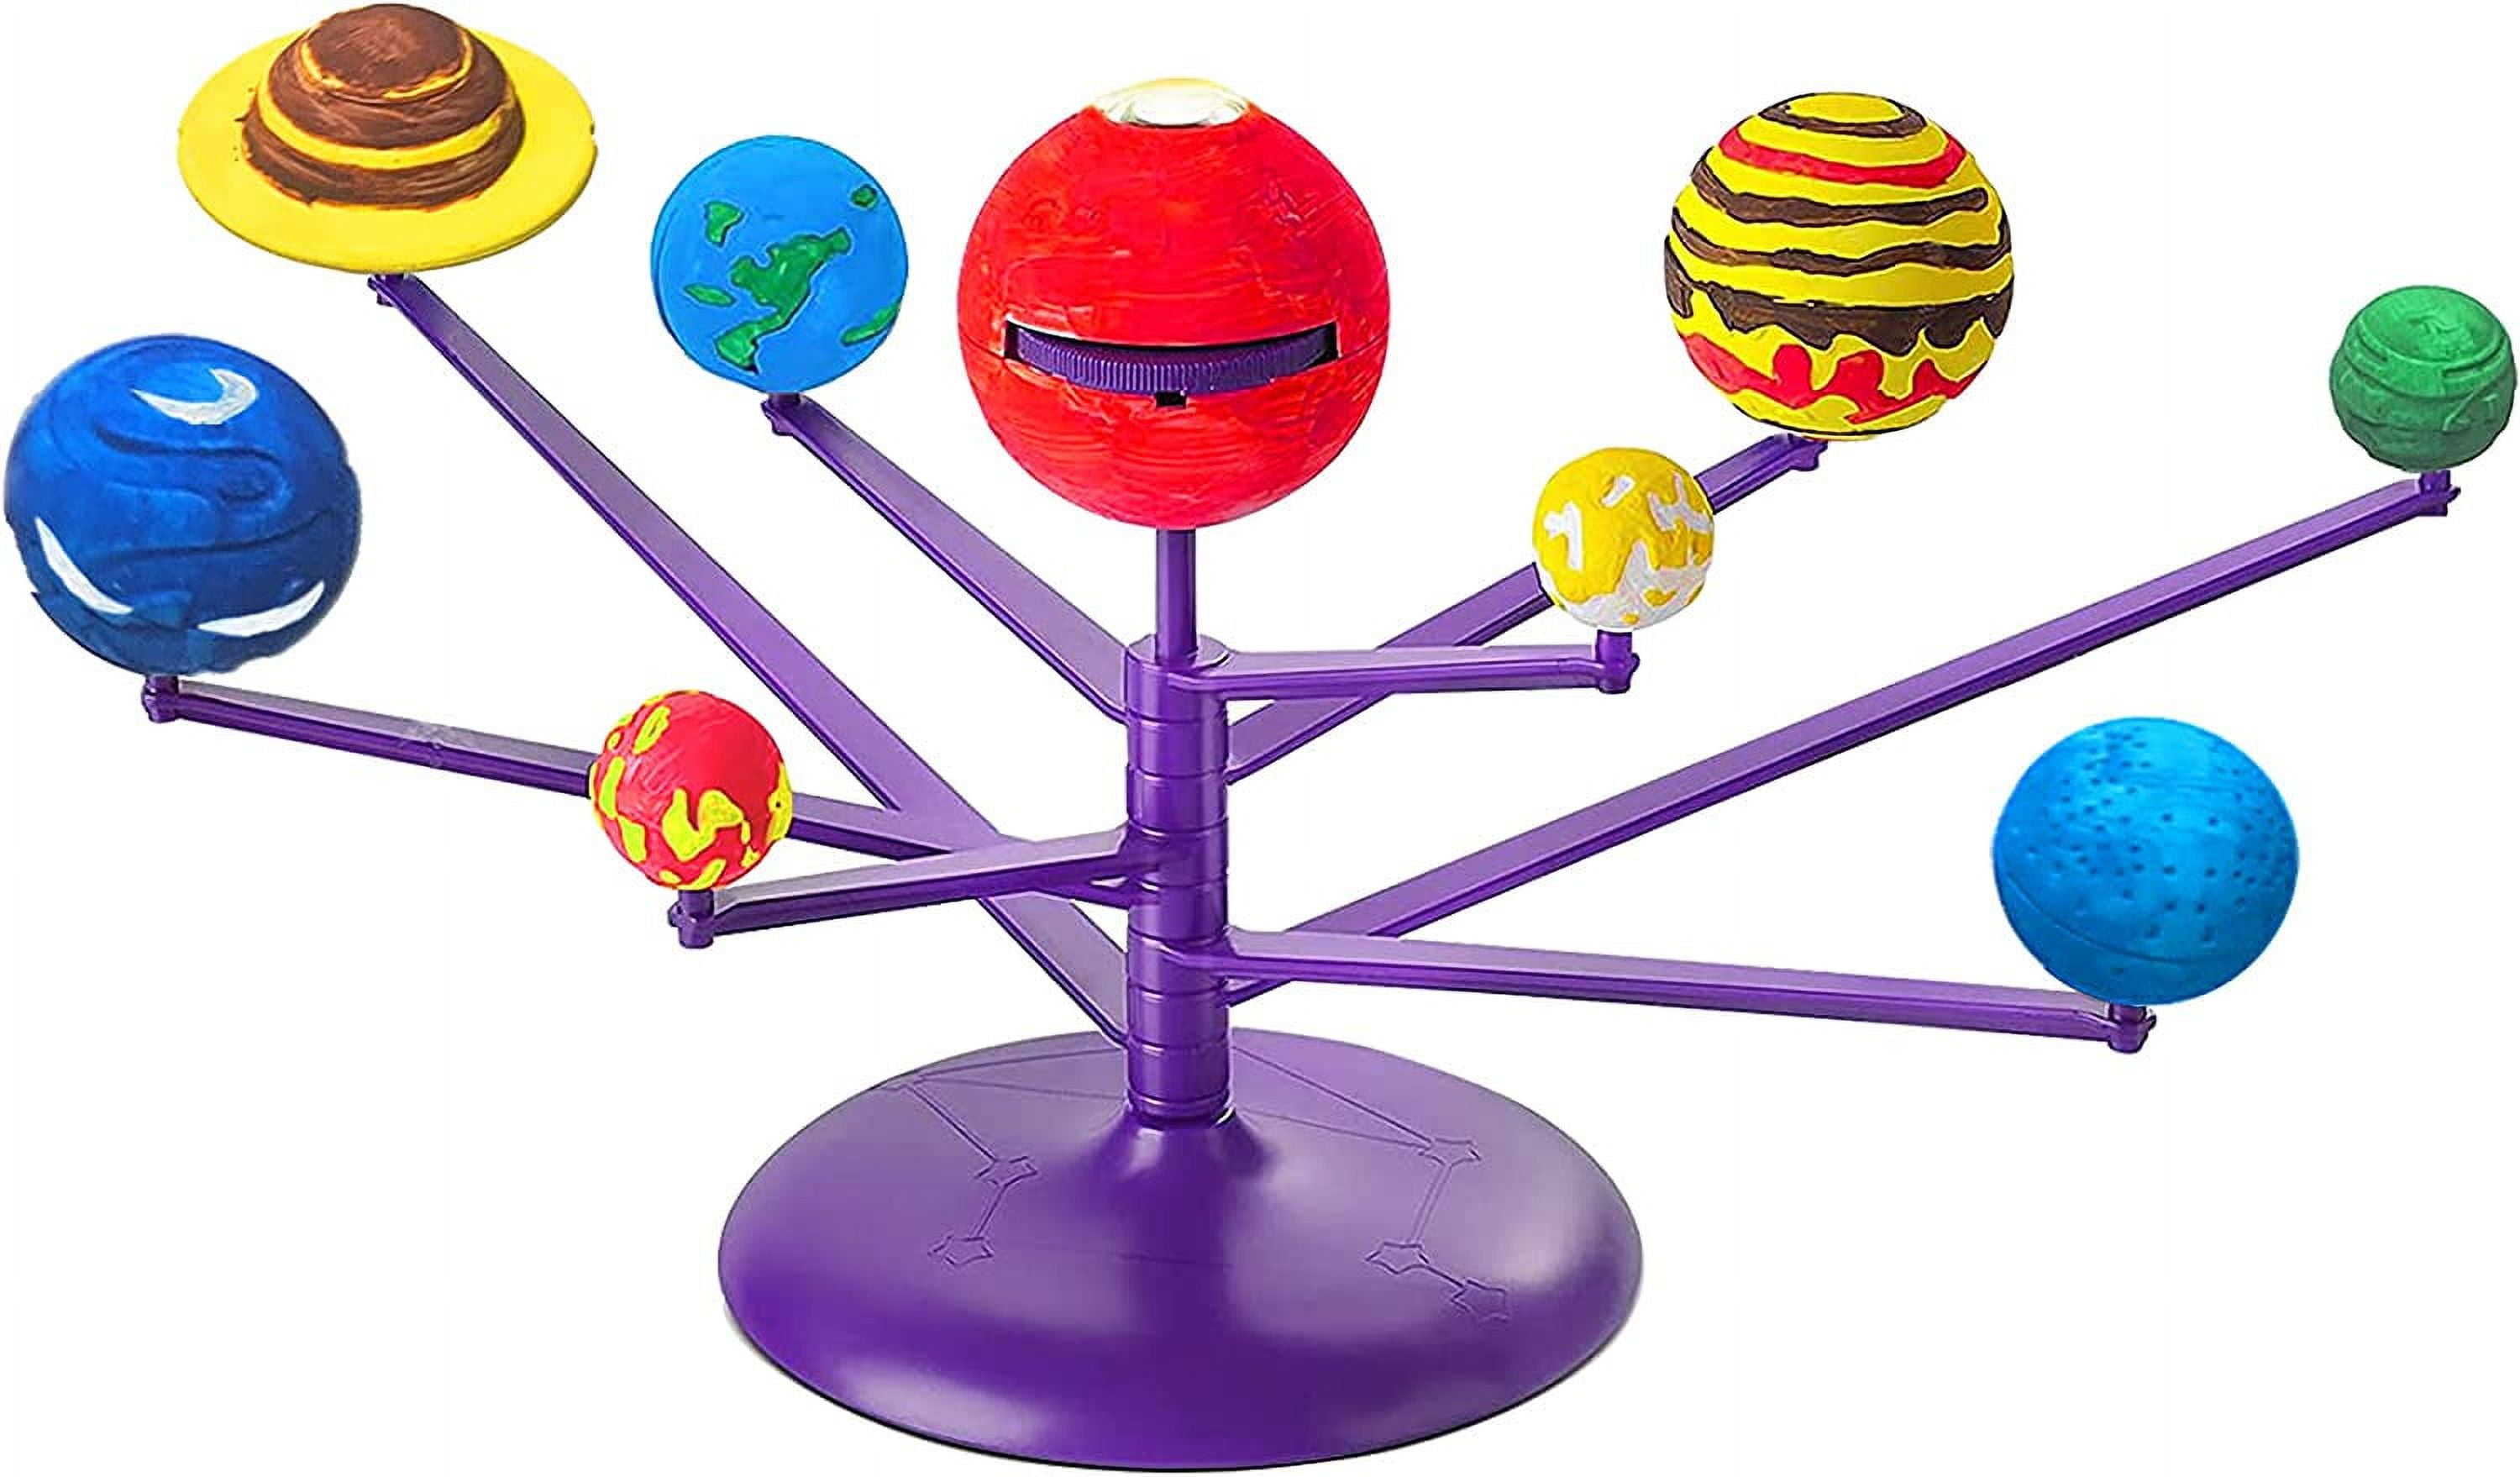 OUNAMIO Solar System Model Science Kit for Kids and Teens